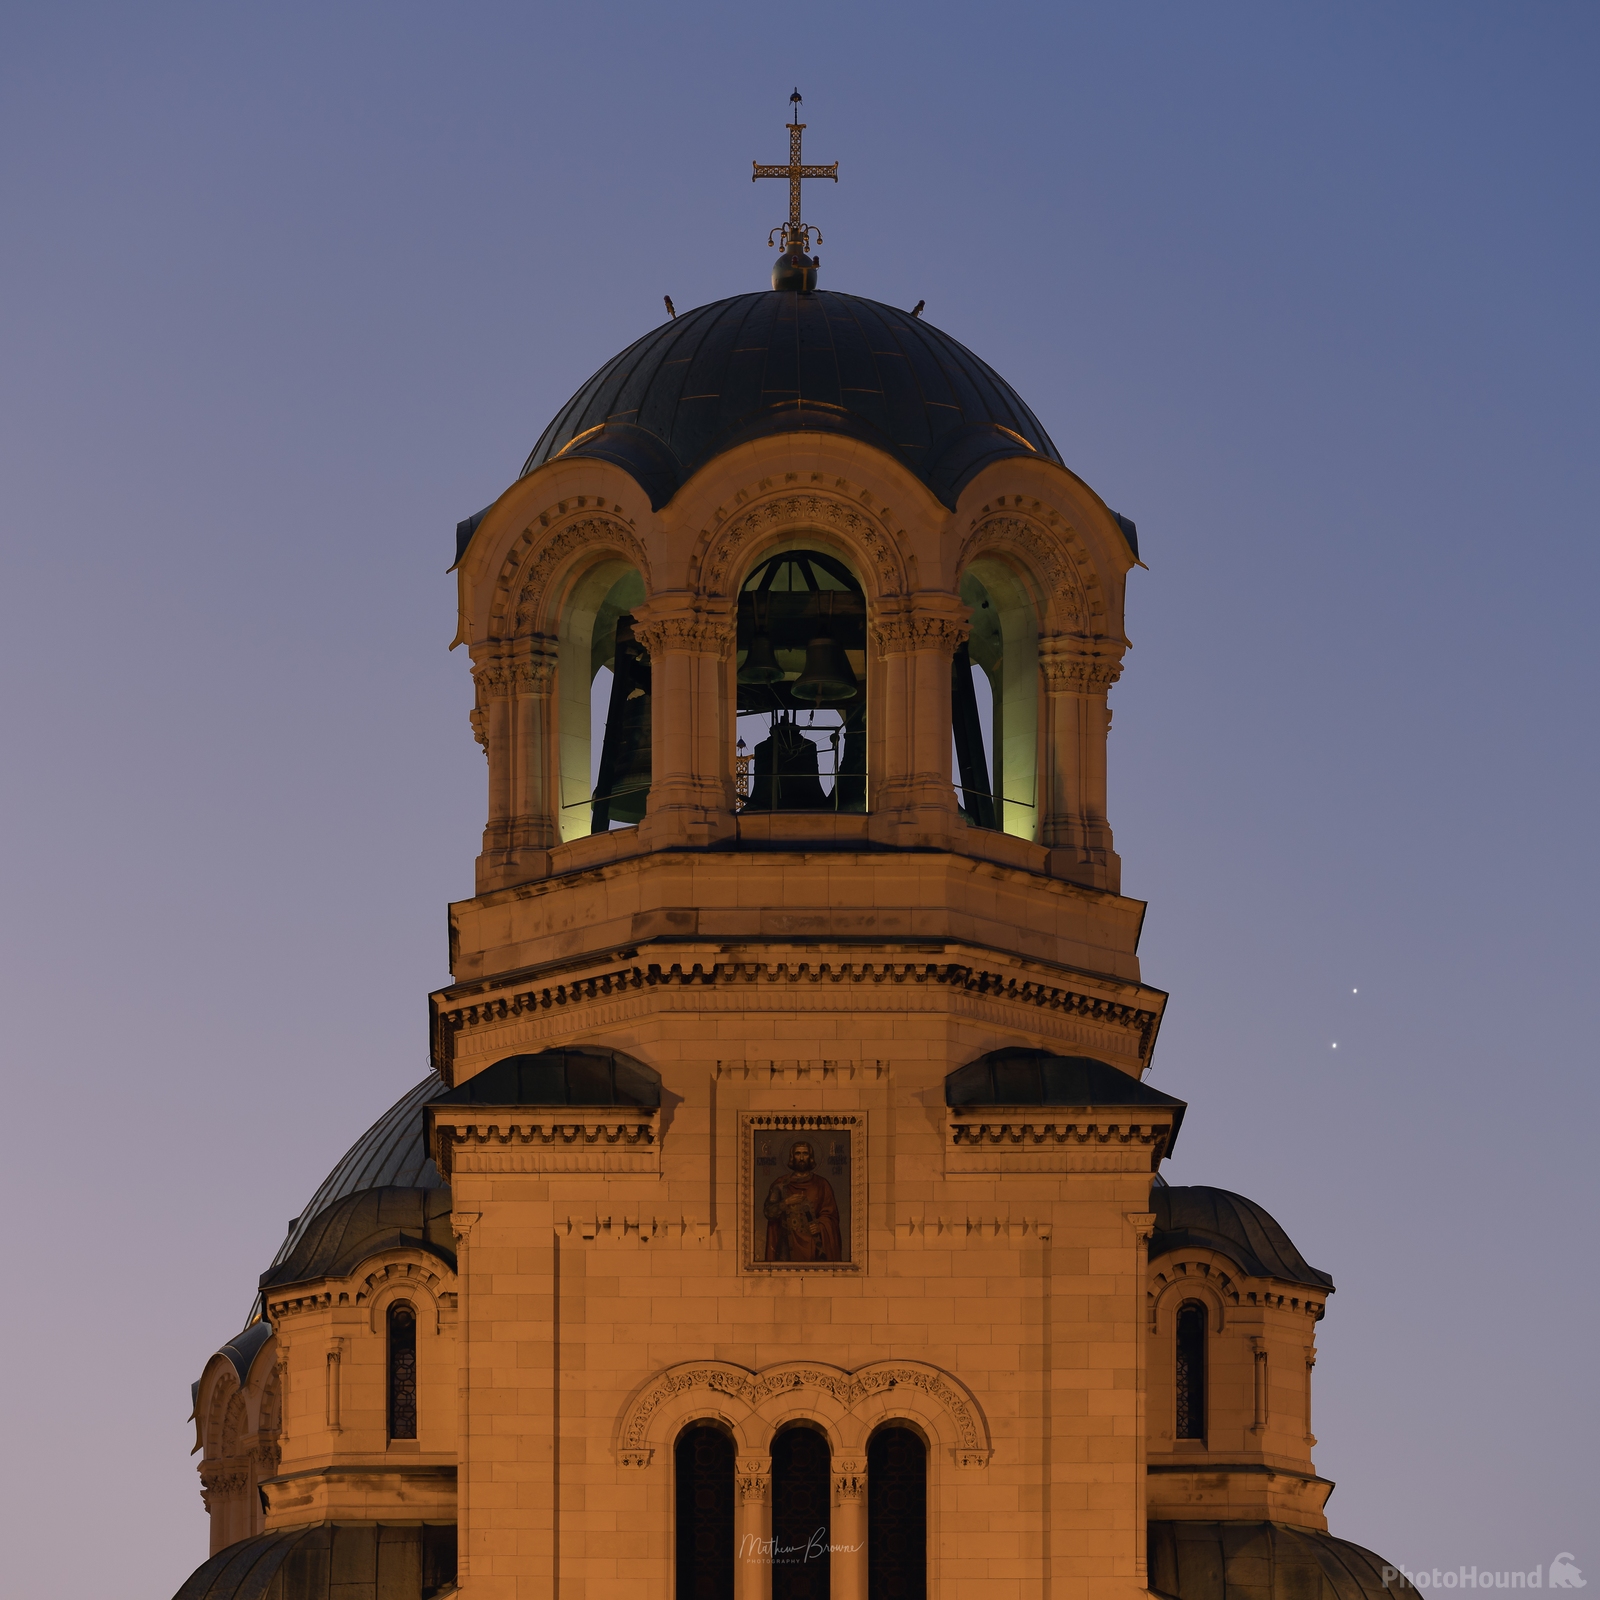 Image of Sofia - Alexander Nevsky Cathedral by Mathew Browne